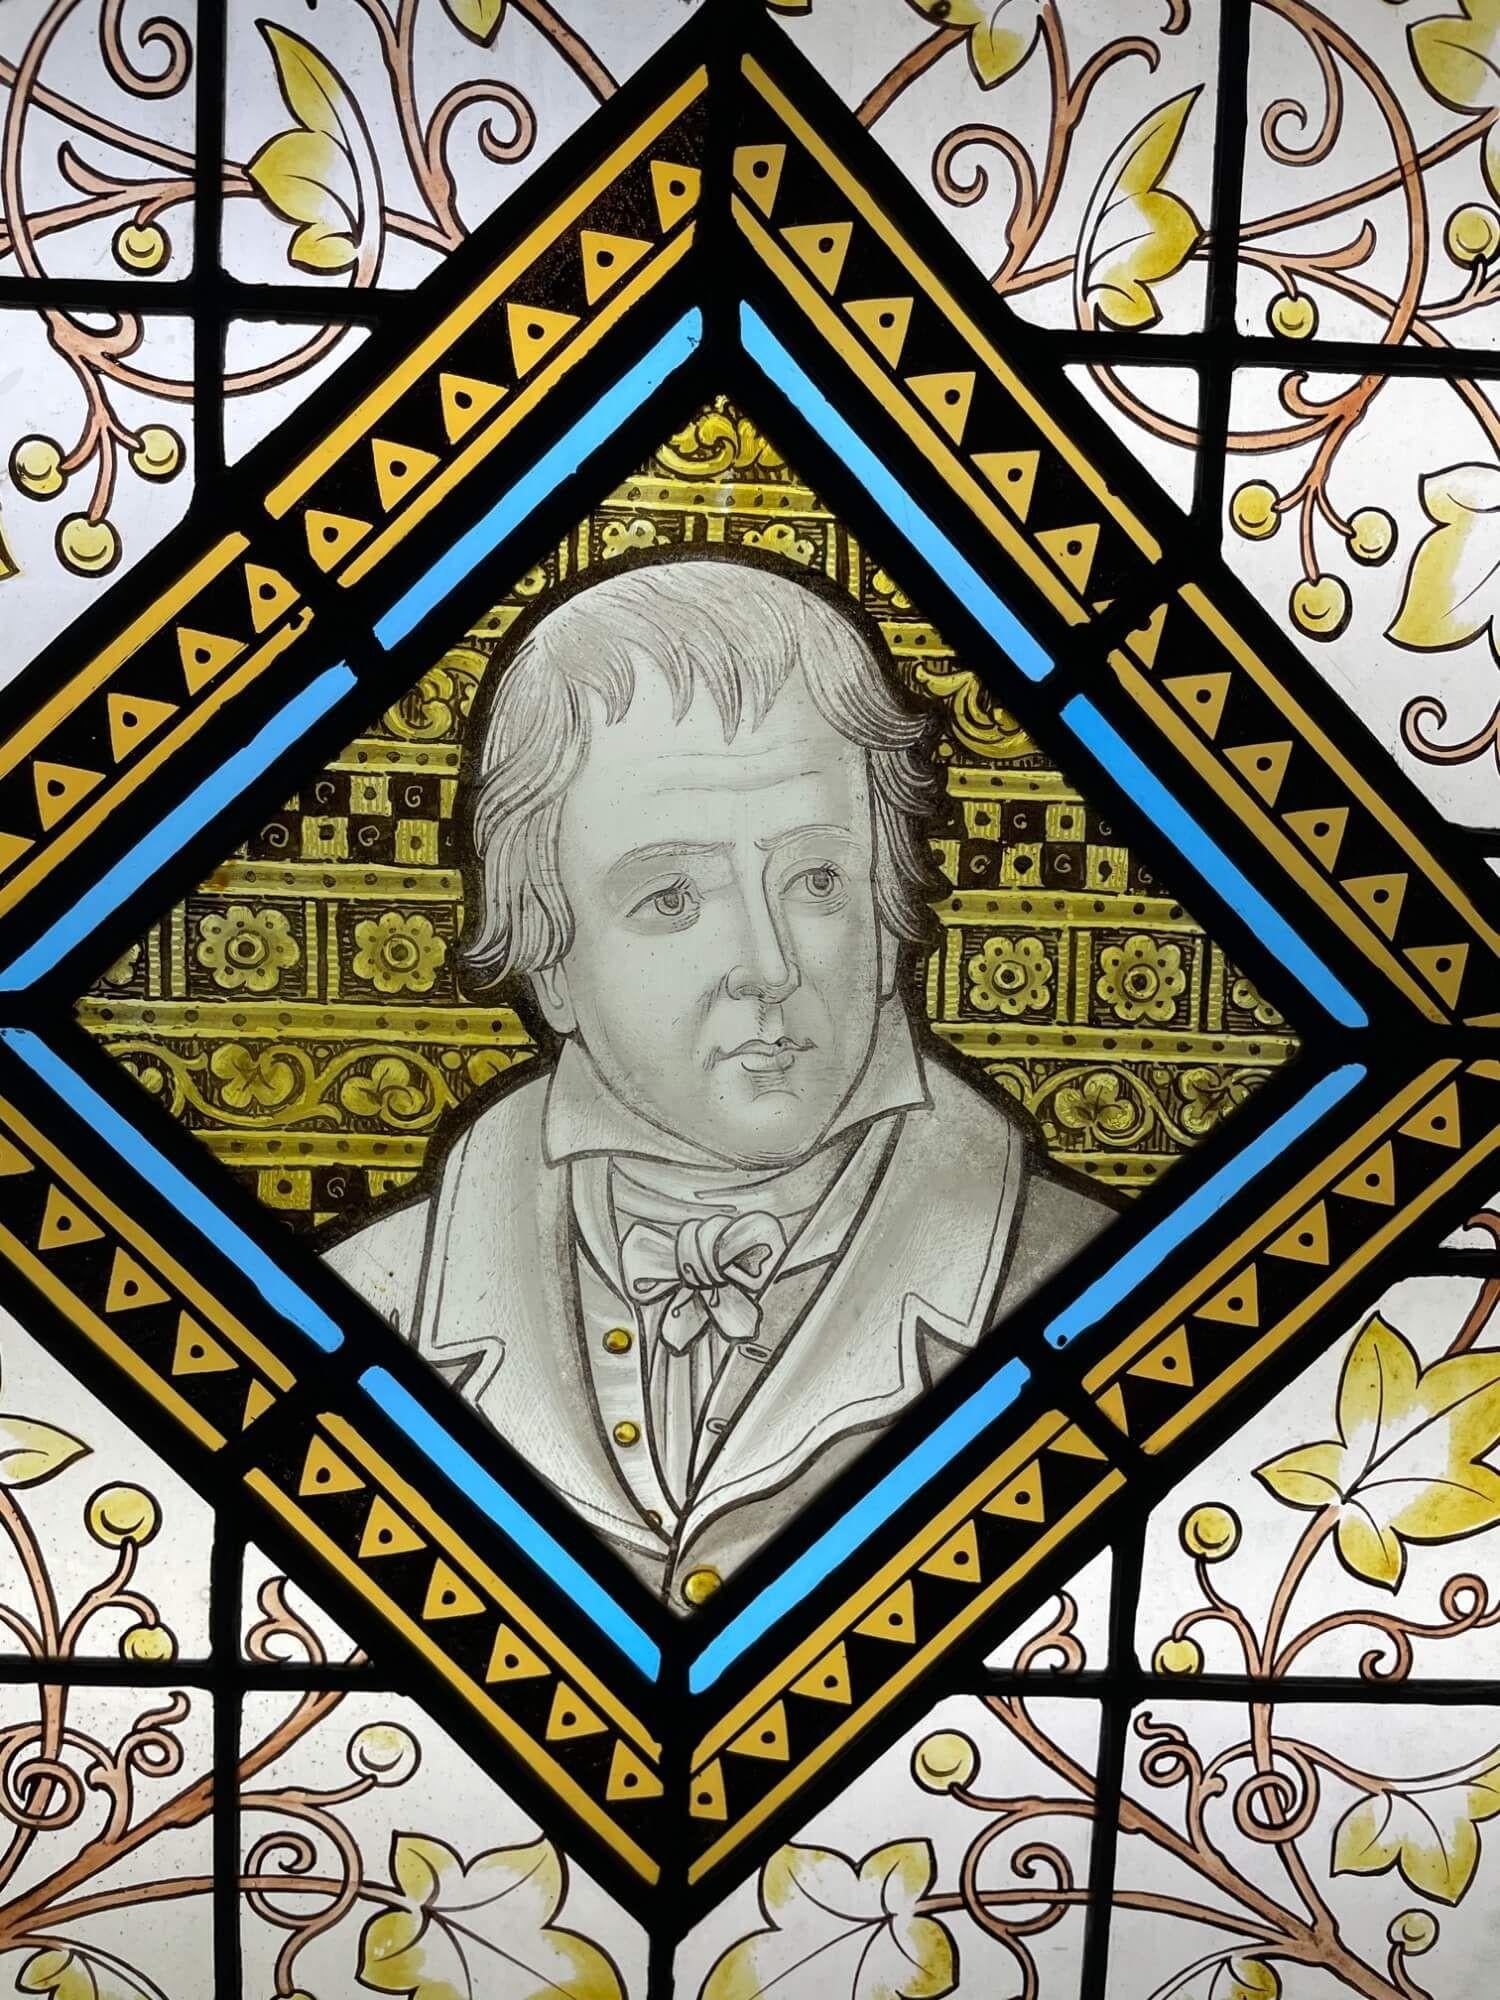 A late 19th century antique stained glass window panel depicting Sir Walter Scott, one of 3 similar we are selling depicting notable figures of British history. At the centre is a distinguishable illustration of Sir Walter Scott, late 18th/early